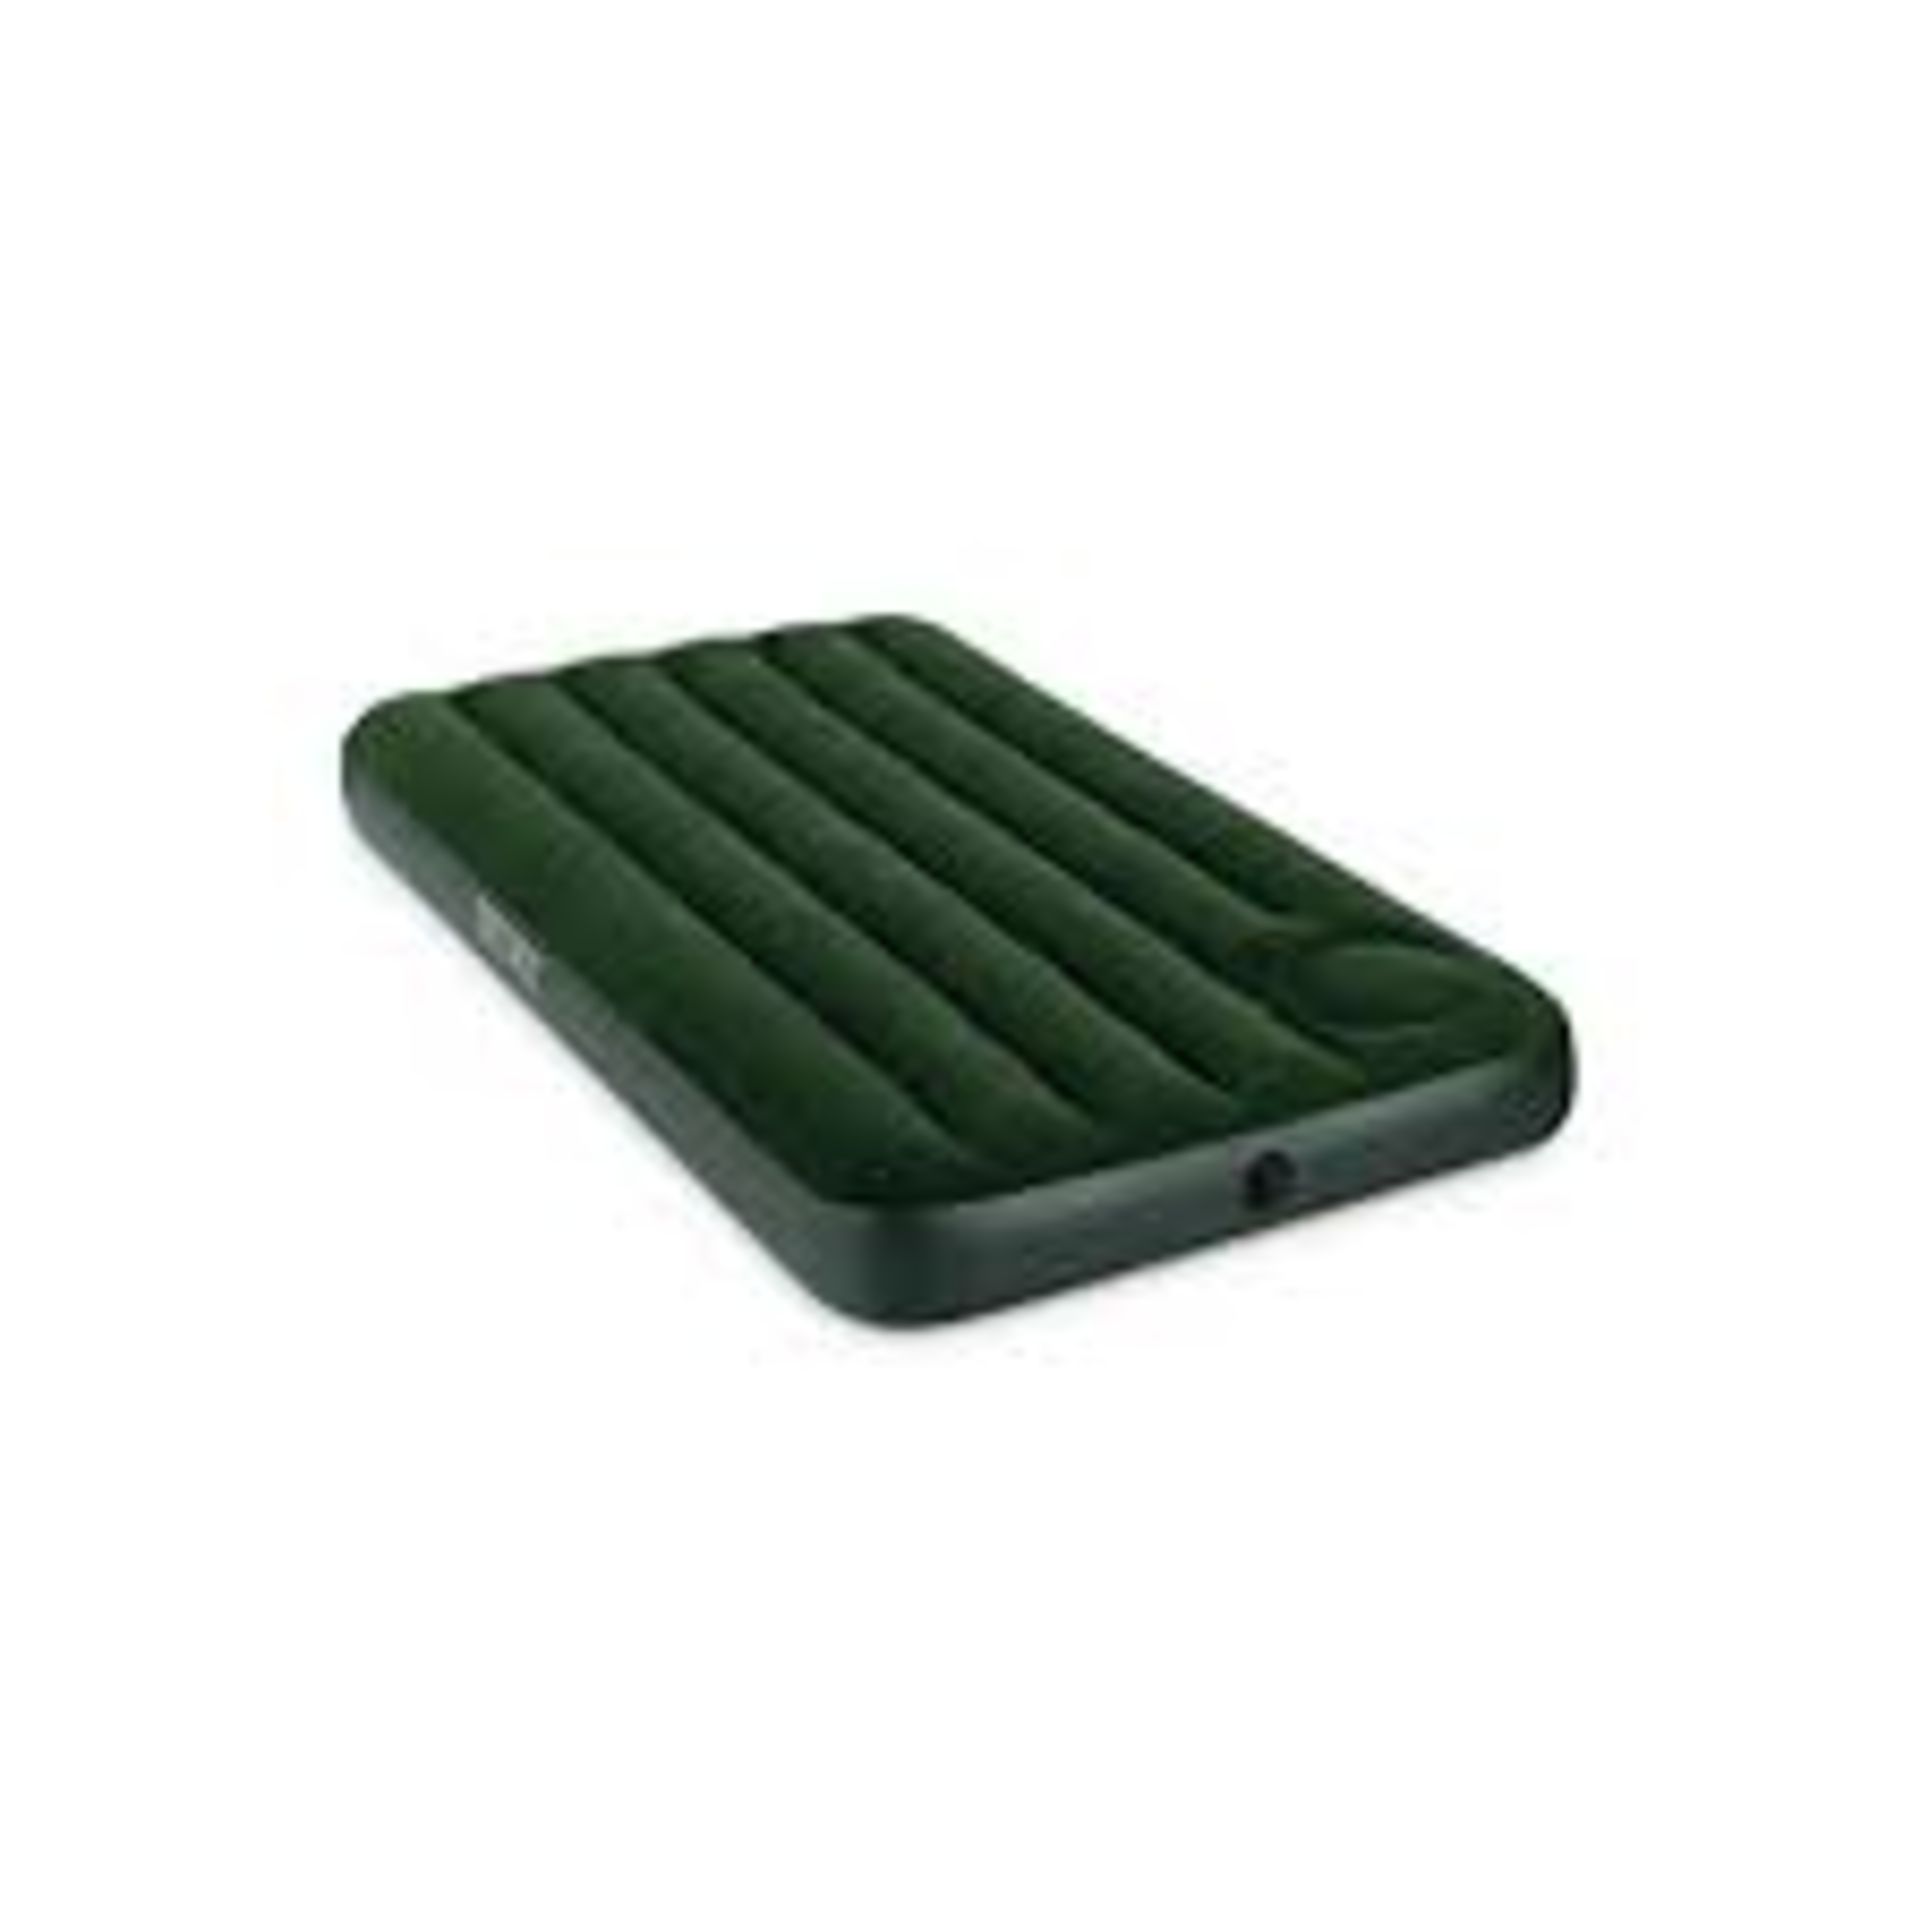 V Brand New Intex Airbed With Built In Foot Pump - ISP £14.99 (Group On)